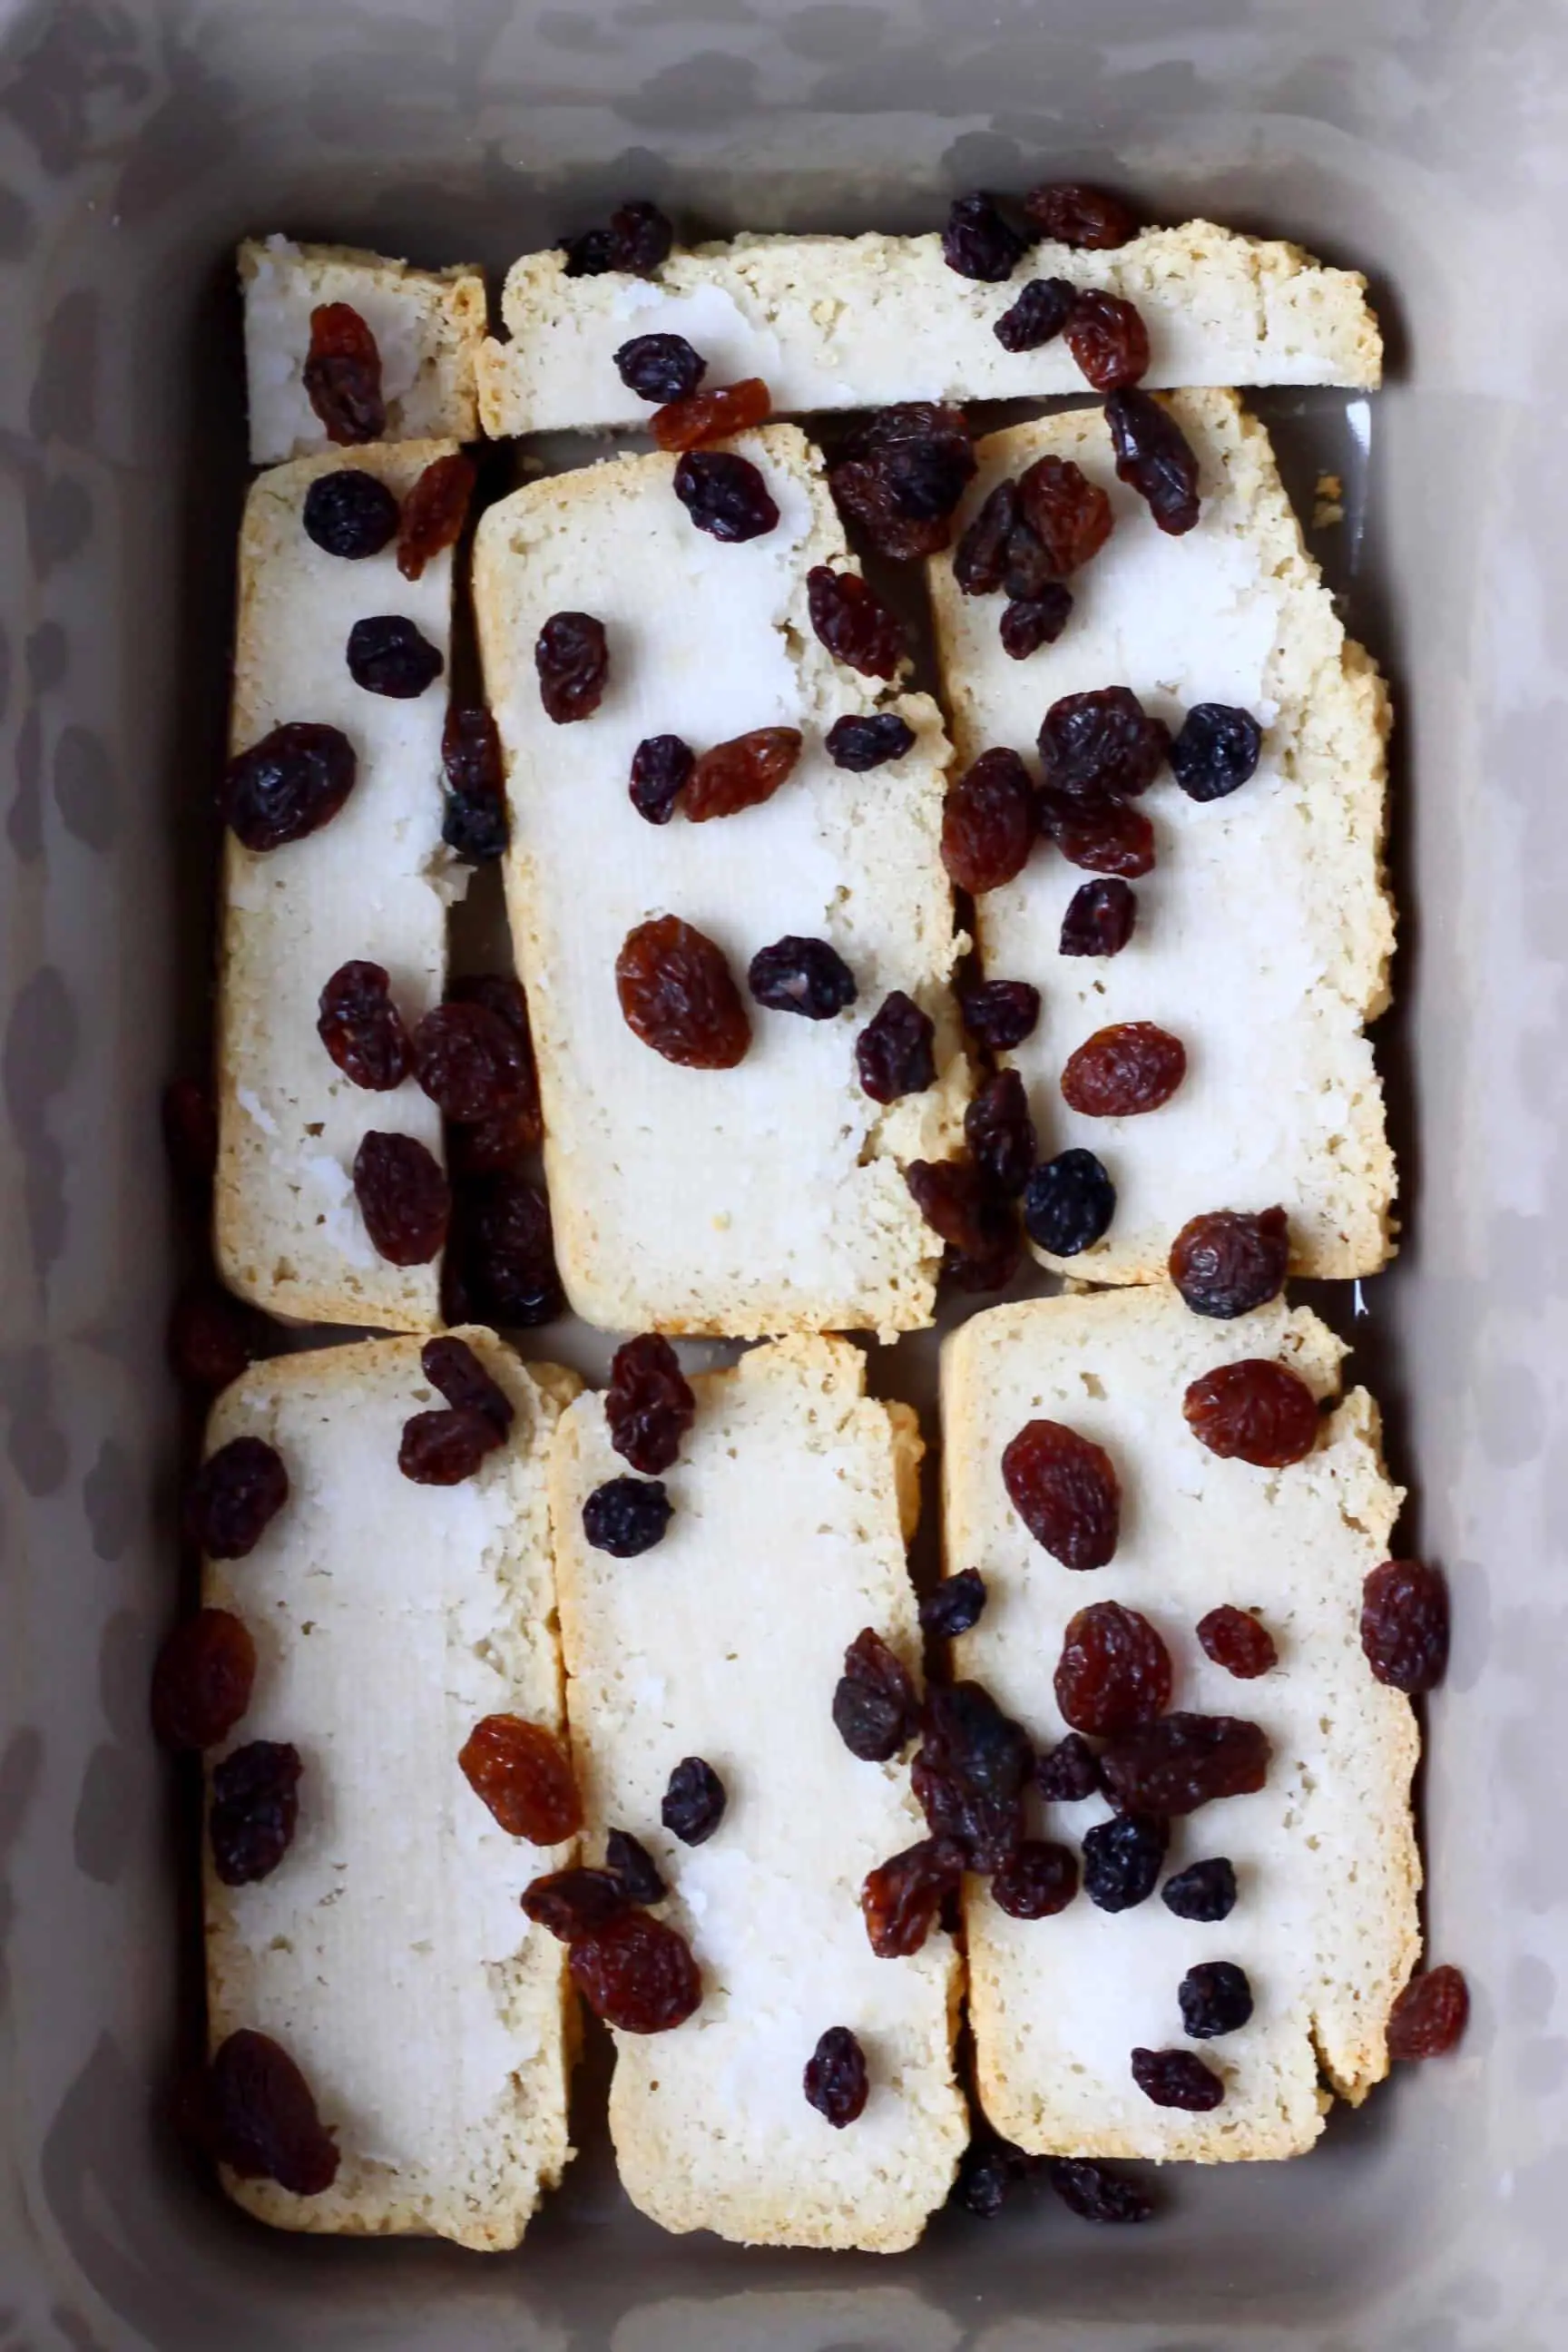 Slices of bread spread with coconut oil and topped with raisins in a grey rectangular baking dish